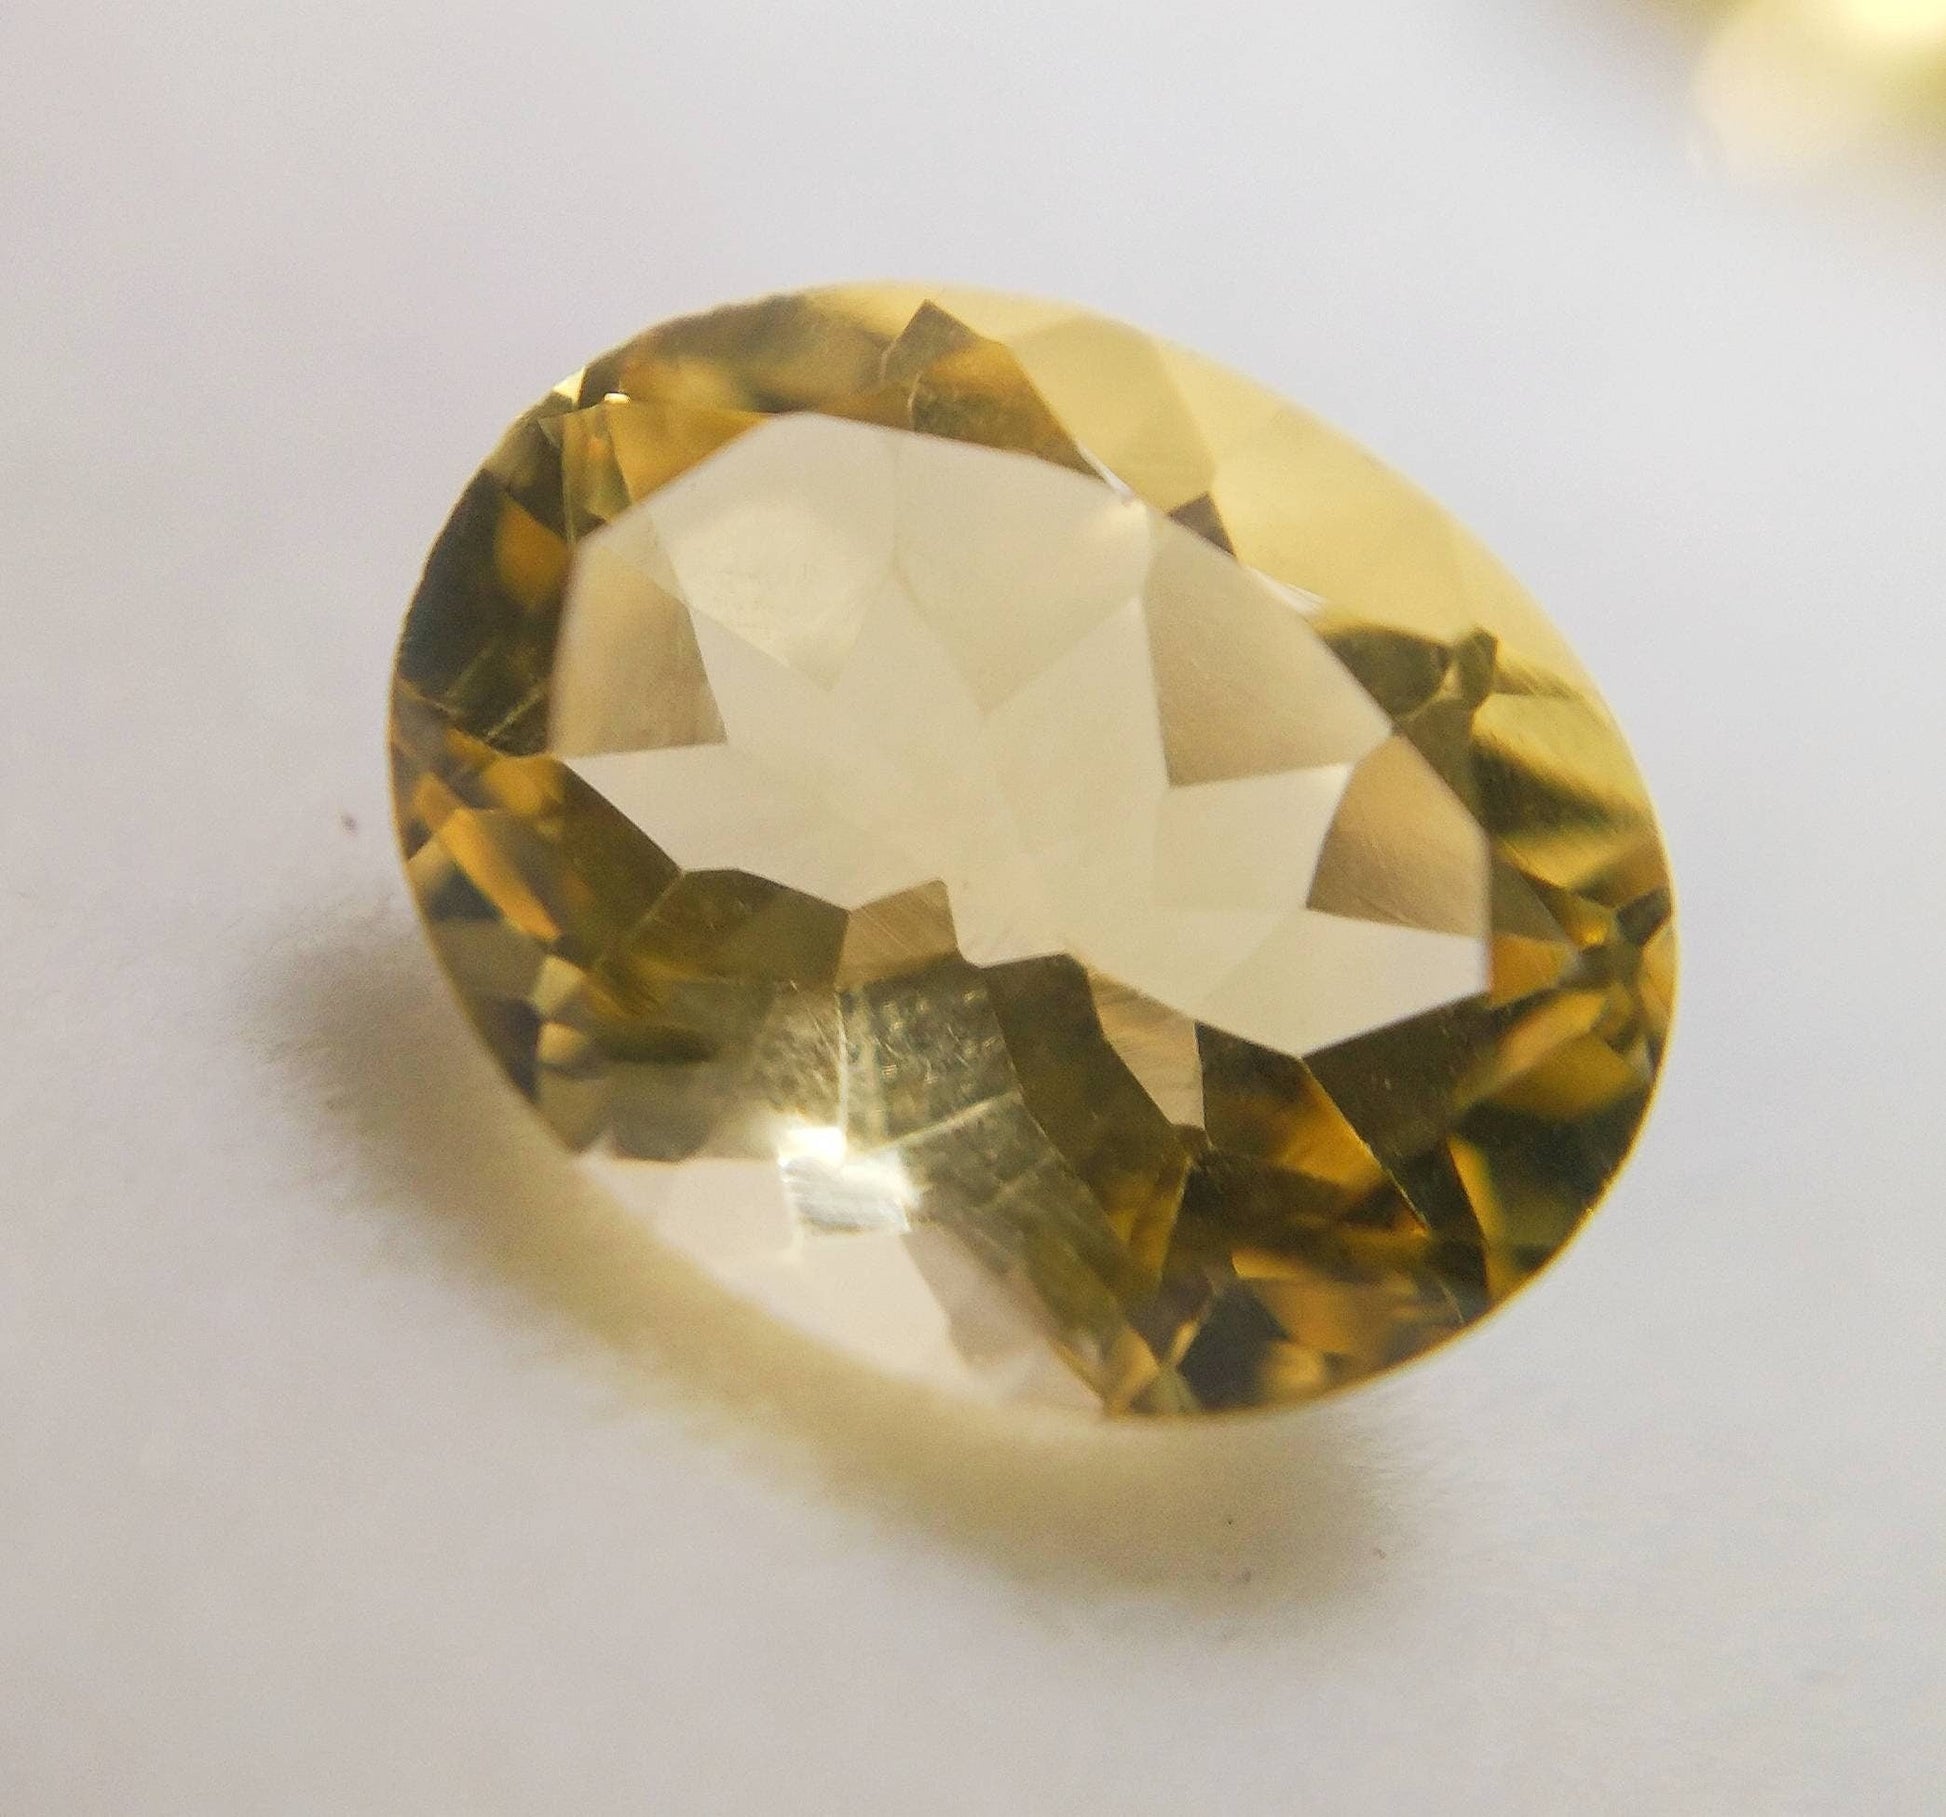 ARSAA GEMS AND MINERALSNatural fine quality beautiful 16 carats small lot of faceted calibrated oval shapes eye clean Clarity yellow citrine gems - Premium  from ARSAA GEMS AND MINERALS - Just $50.00! Shop now at ARSAA GEMS AND MINERALS